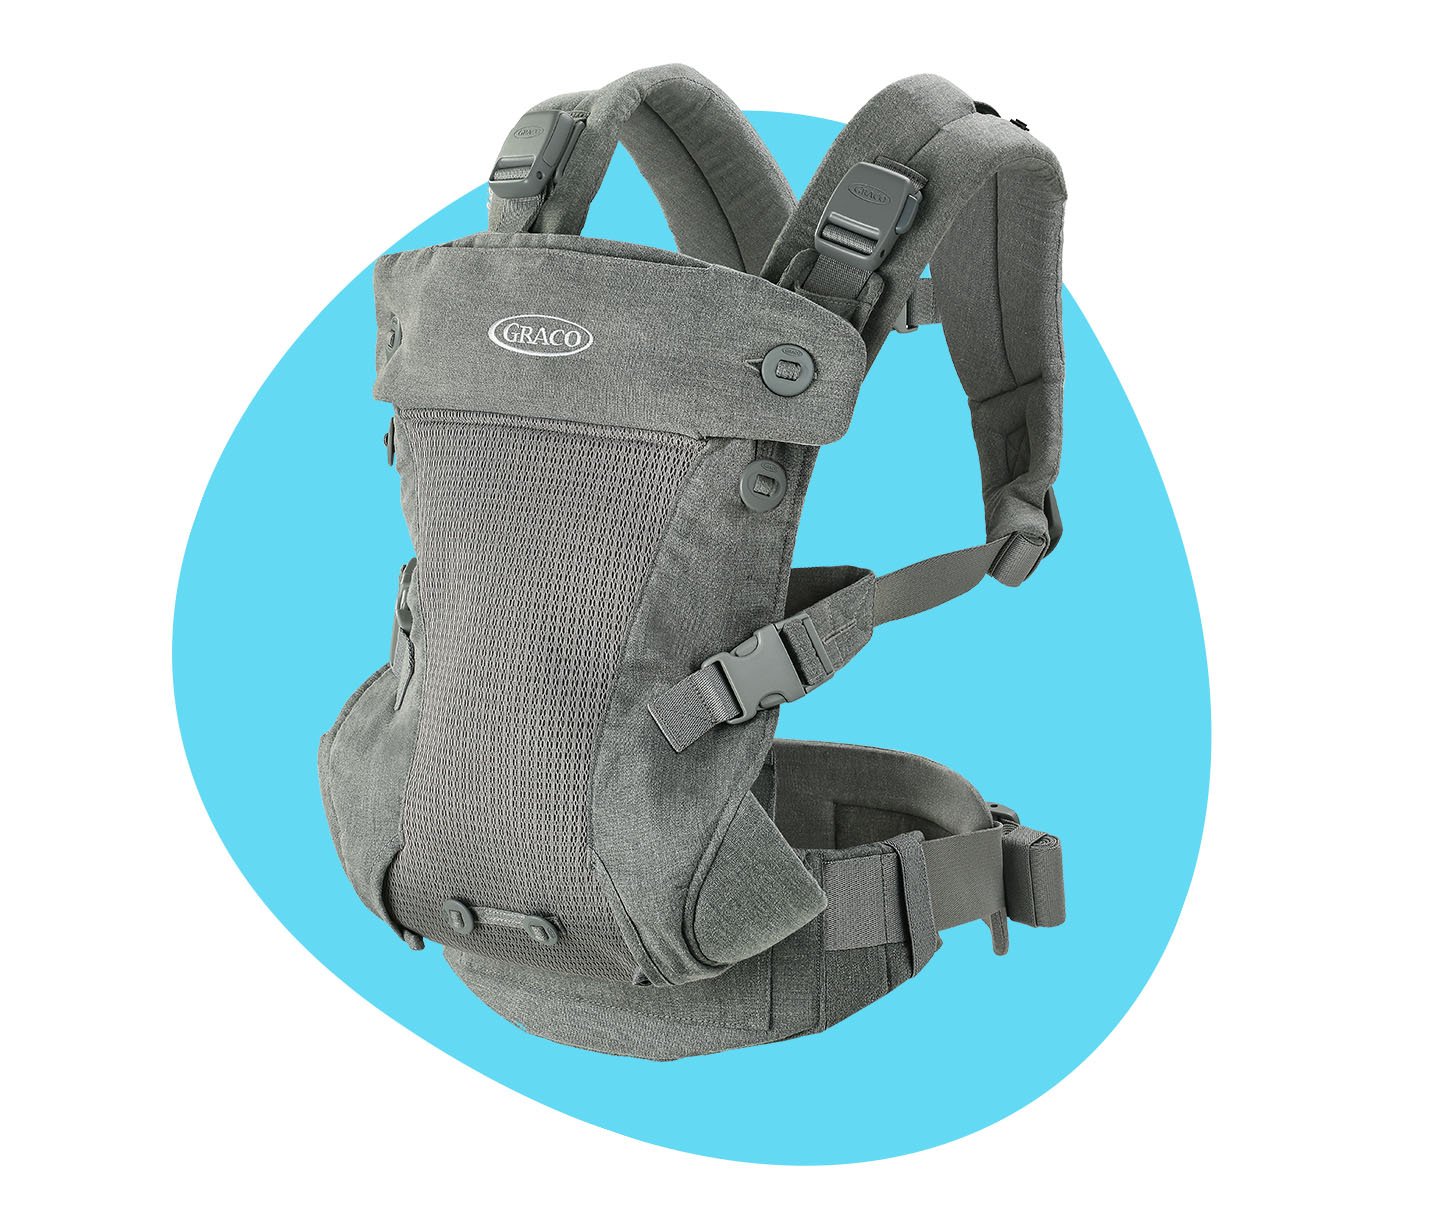 What Are the Types of Baby Carrier - Millan Baby Shop